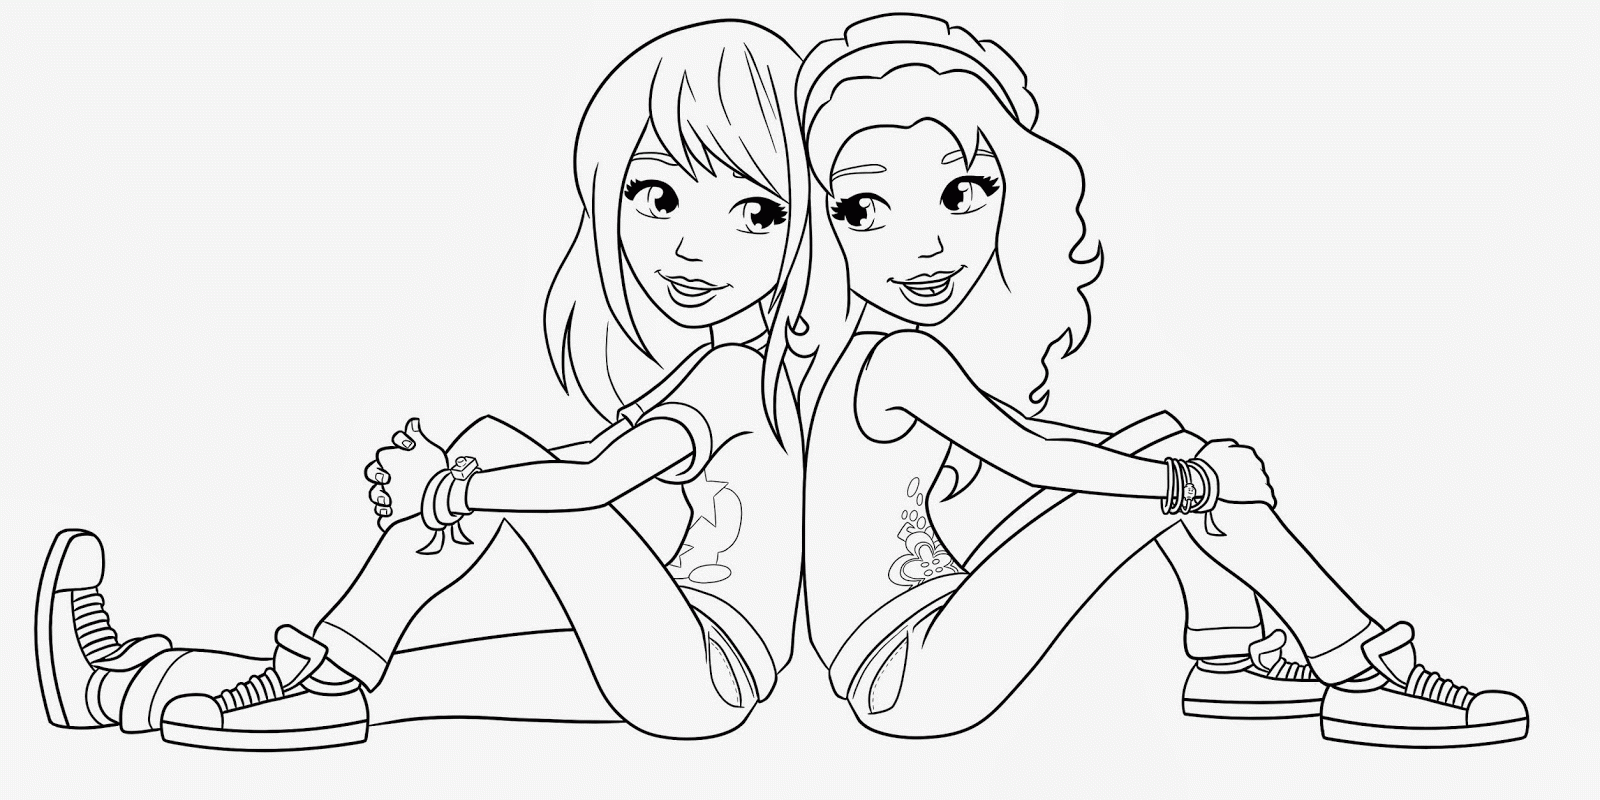 Printable Free Coloring Pages Of Best Friends - Widetheme